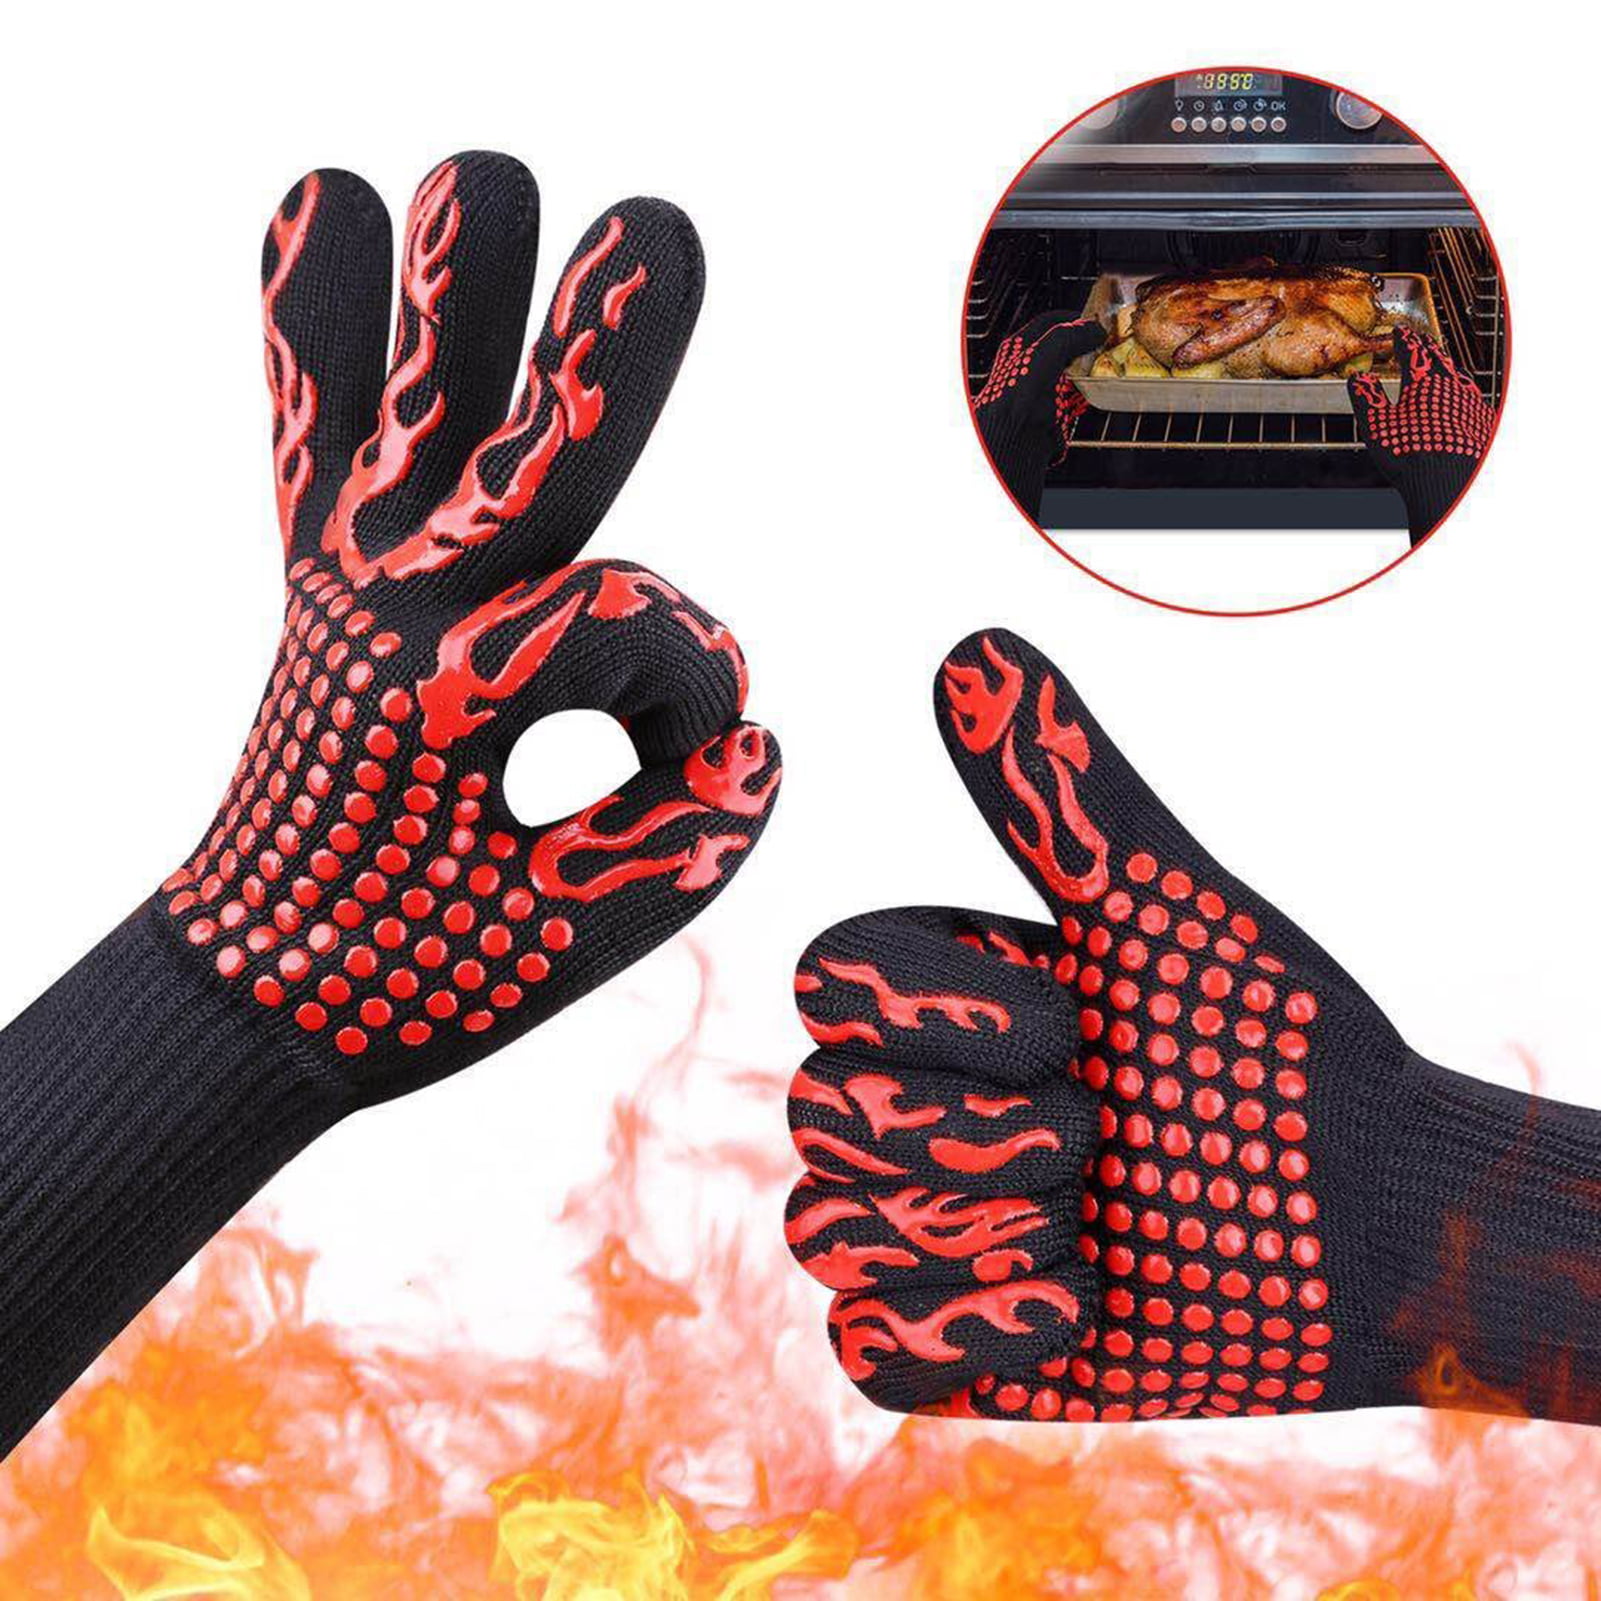 Microwave Gloves Insulation Temperature Resistance Anti-scald Flower Country Sty